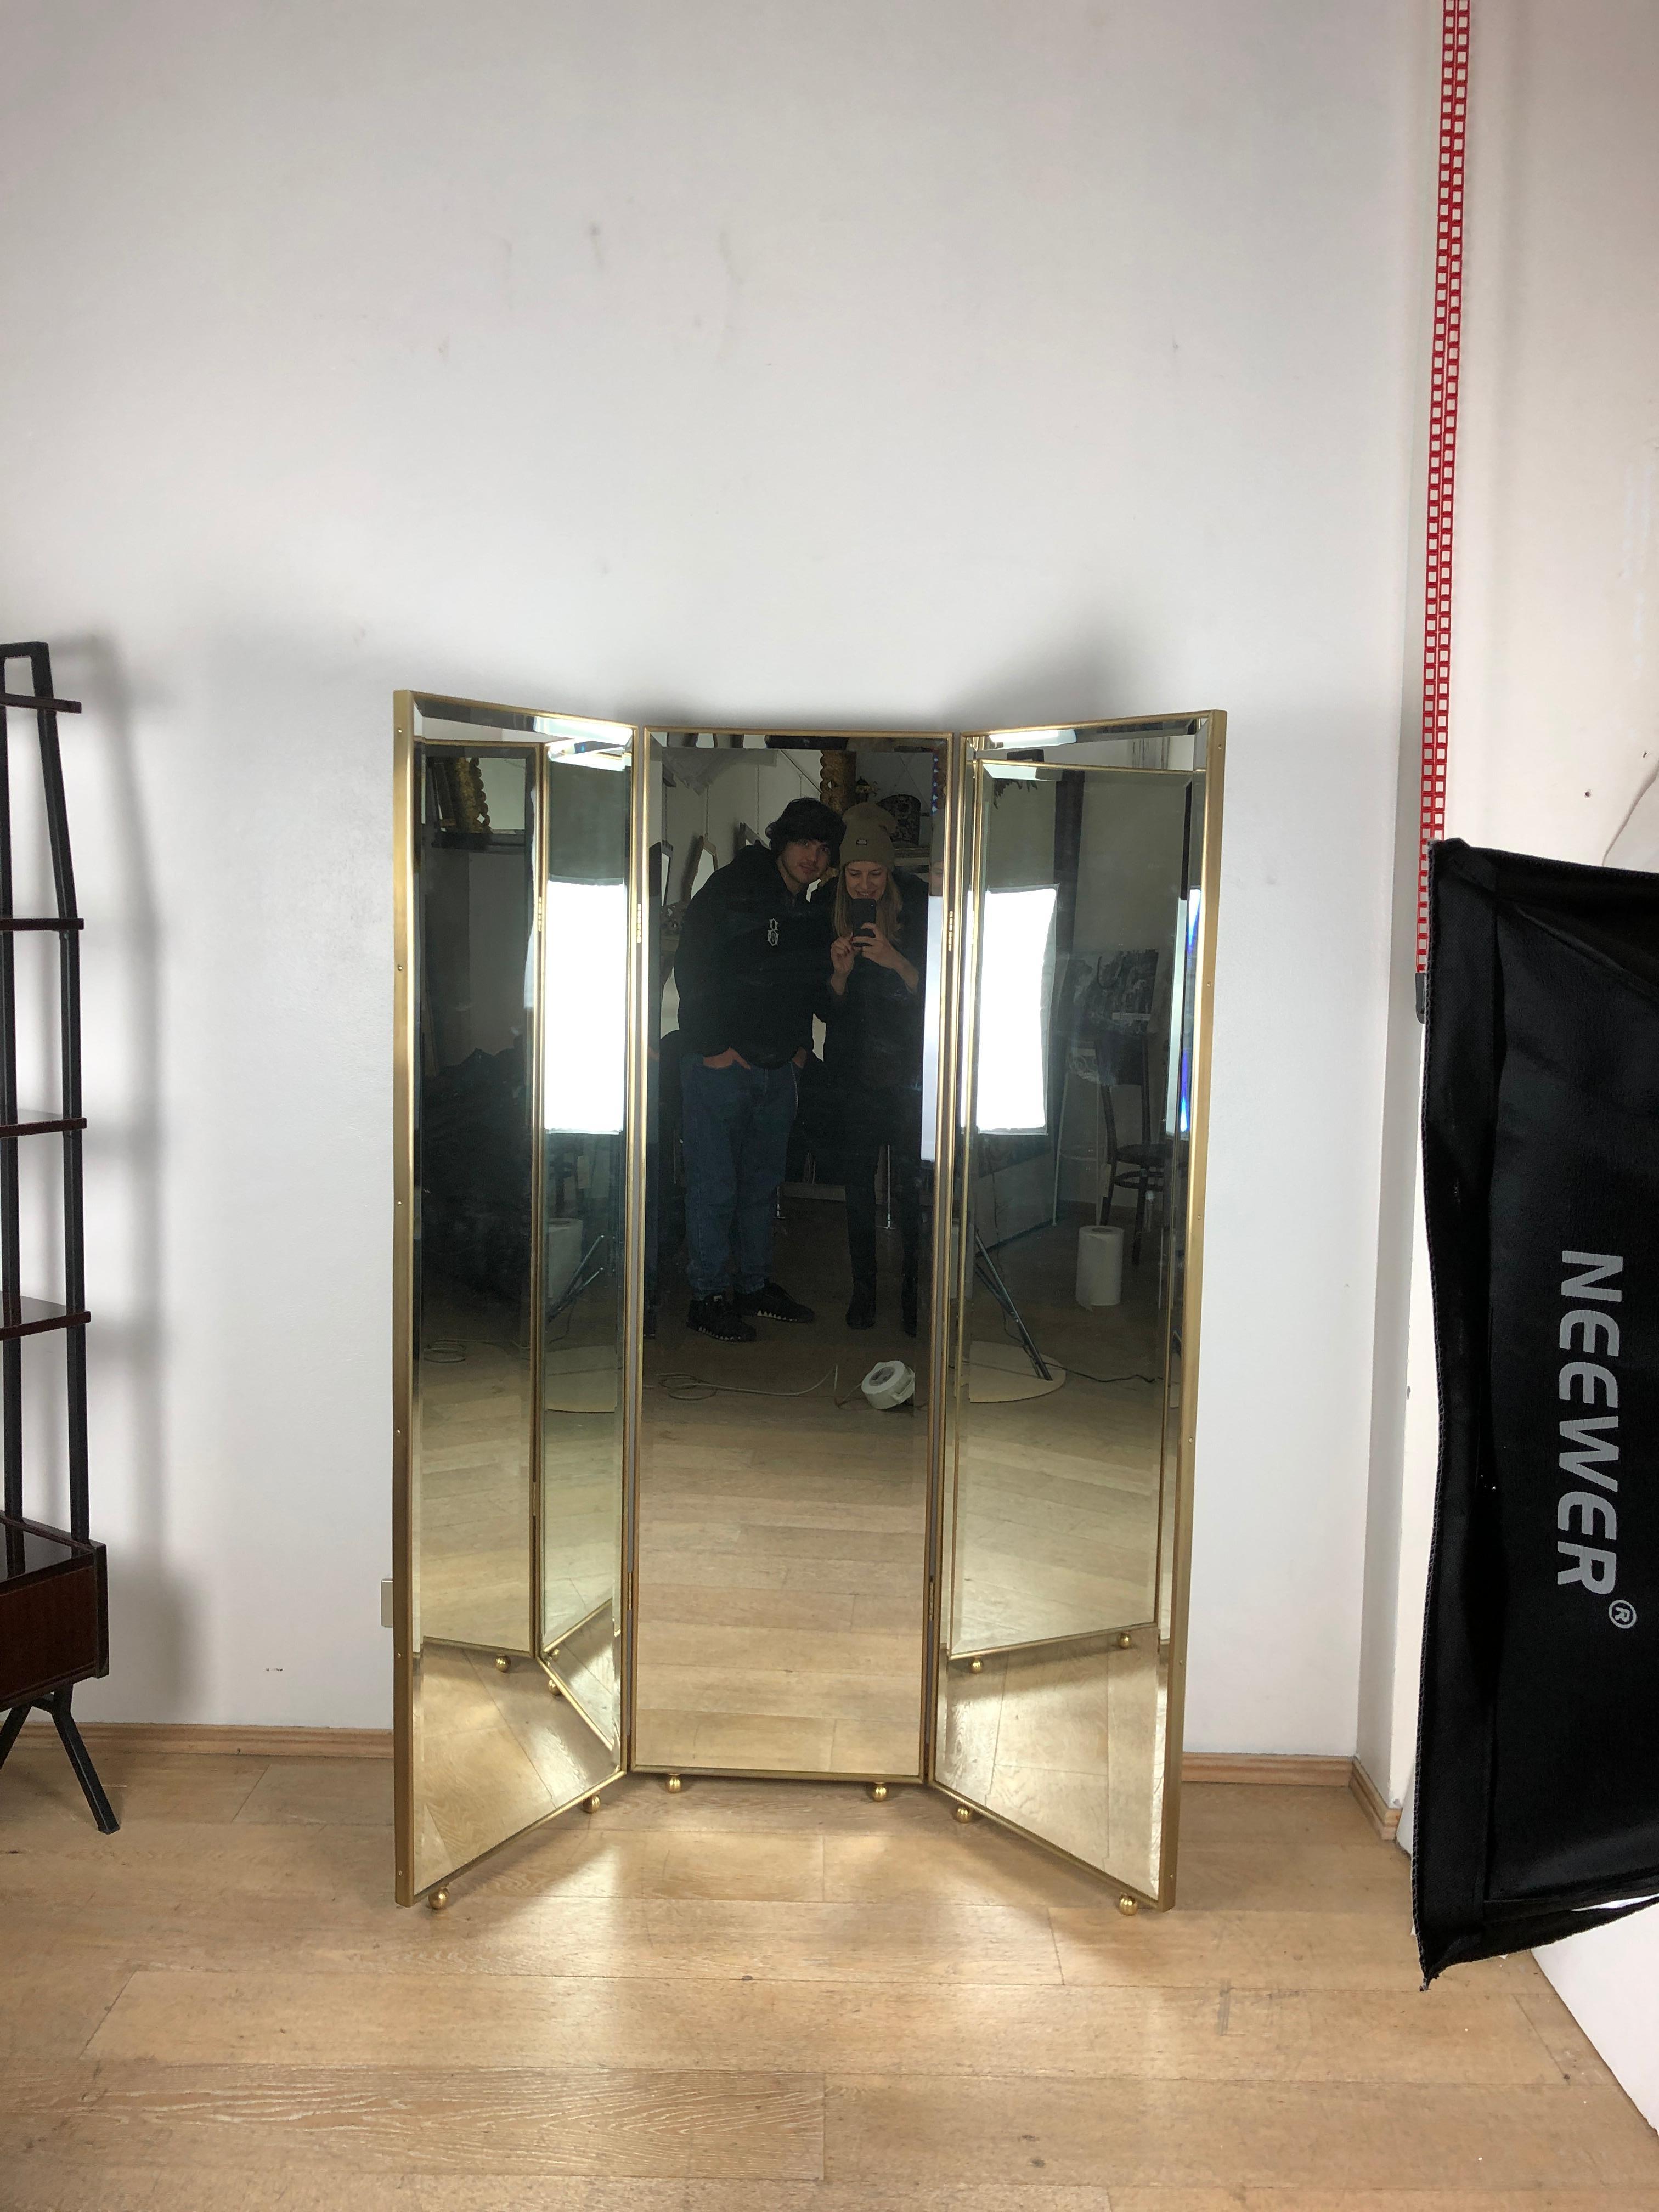 Customizable Art Deco style mirrored three panels brass frame screen

Screen composed by three mirrored panels and brass frames. Ideal as room divider, to decor a fitting room, a wardrobe, to decor a dark edge of a room. This is a complete